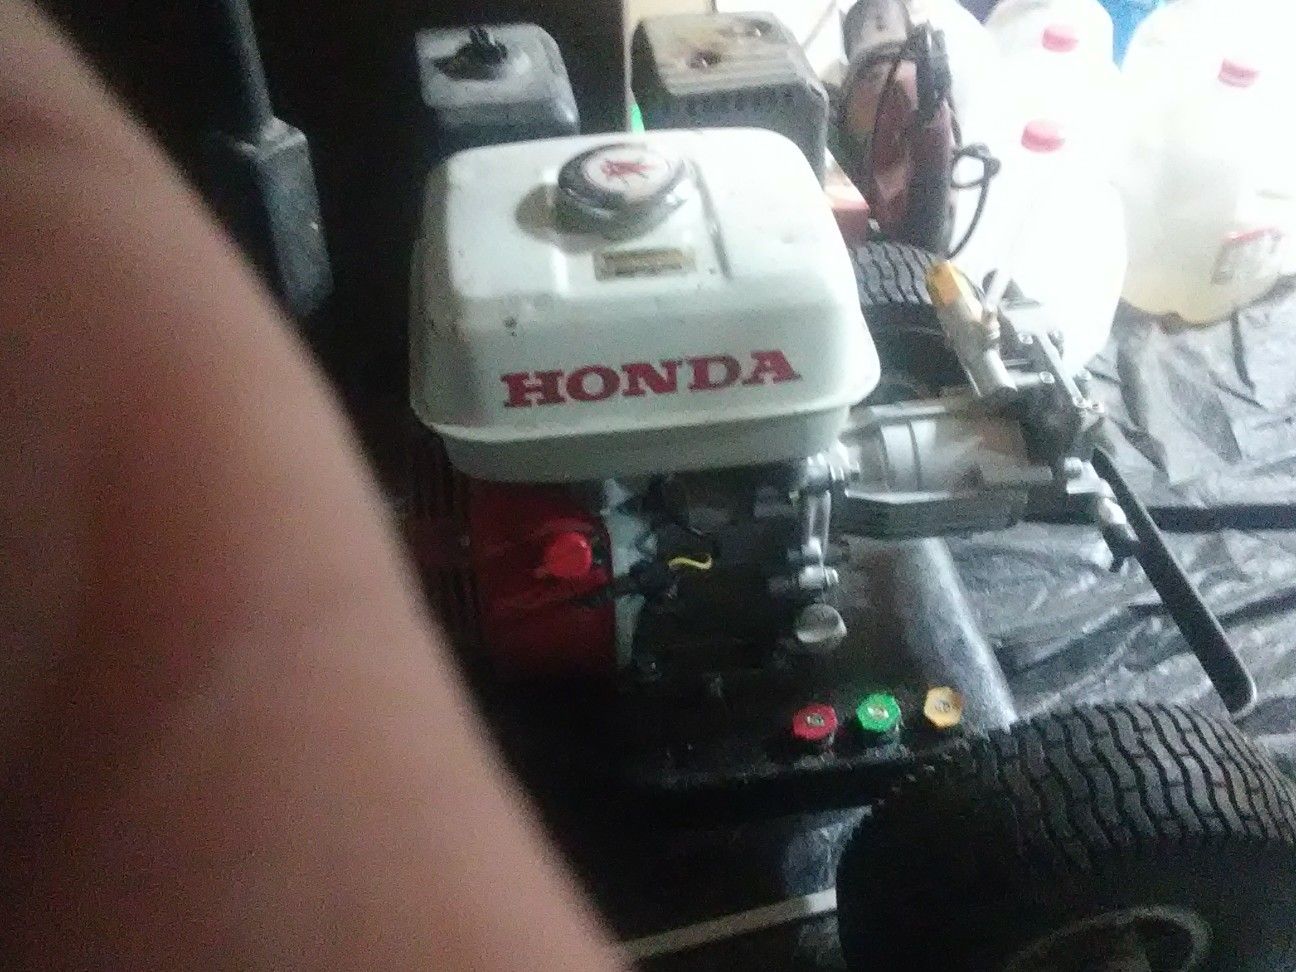 Honda commercial pressure washer with Honda gx 160 5.5 new pump new hose and gun with 5 tips